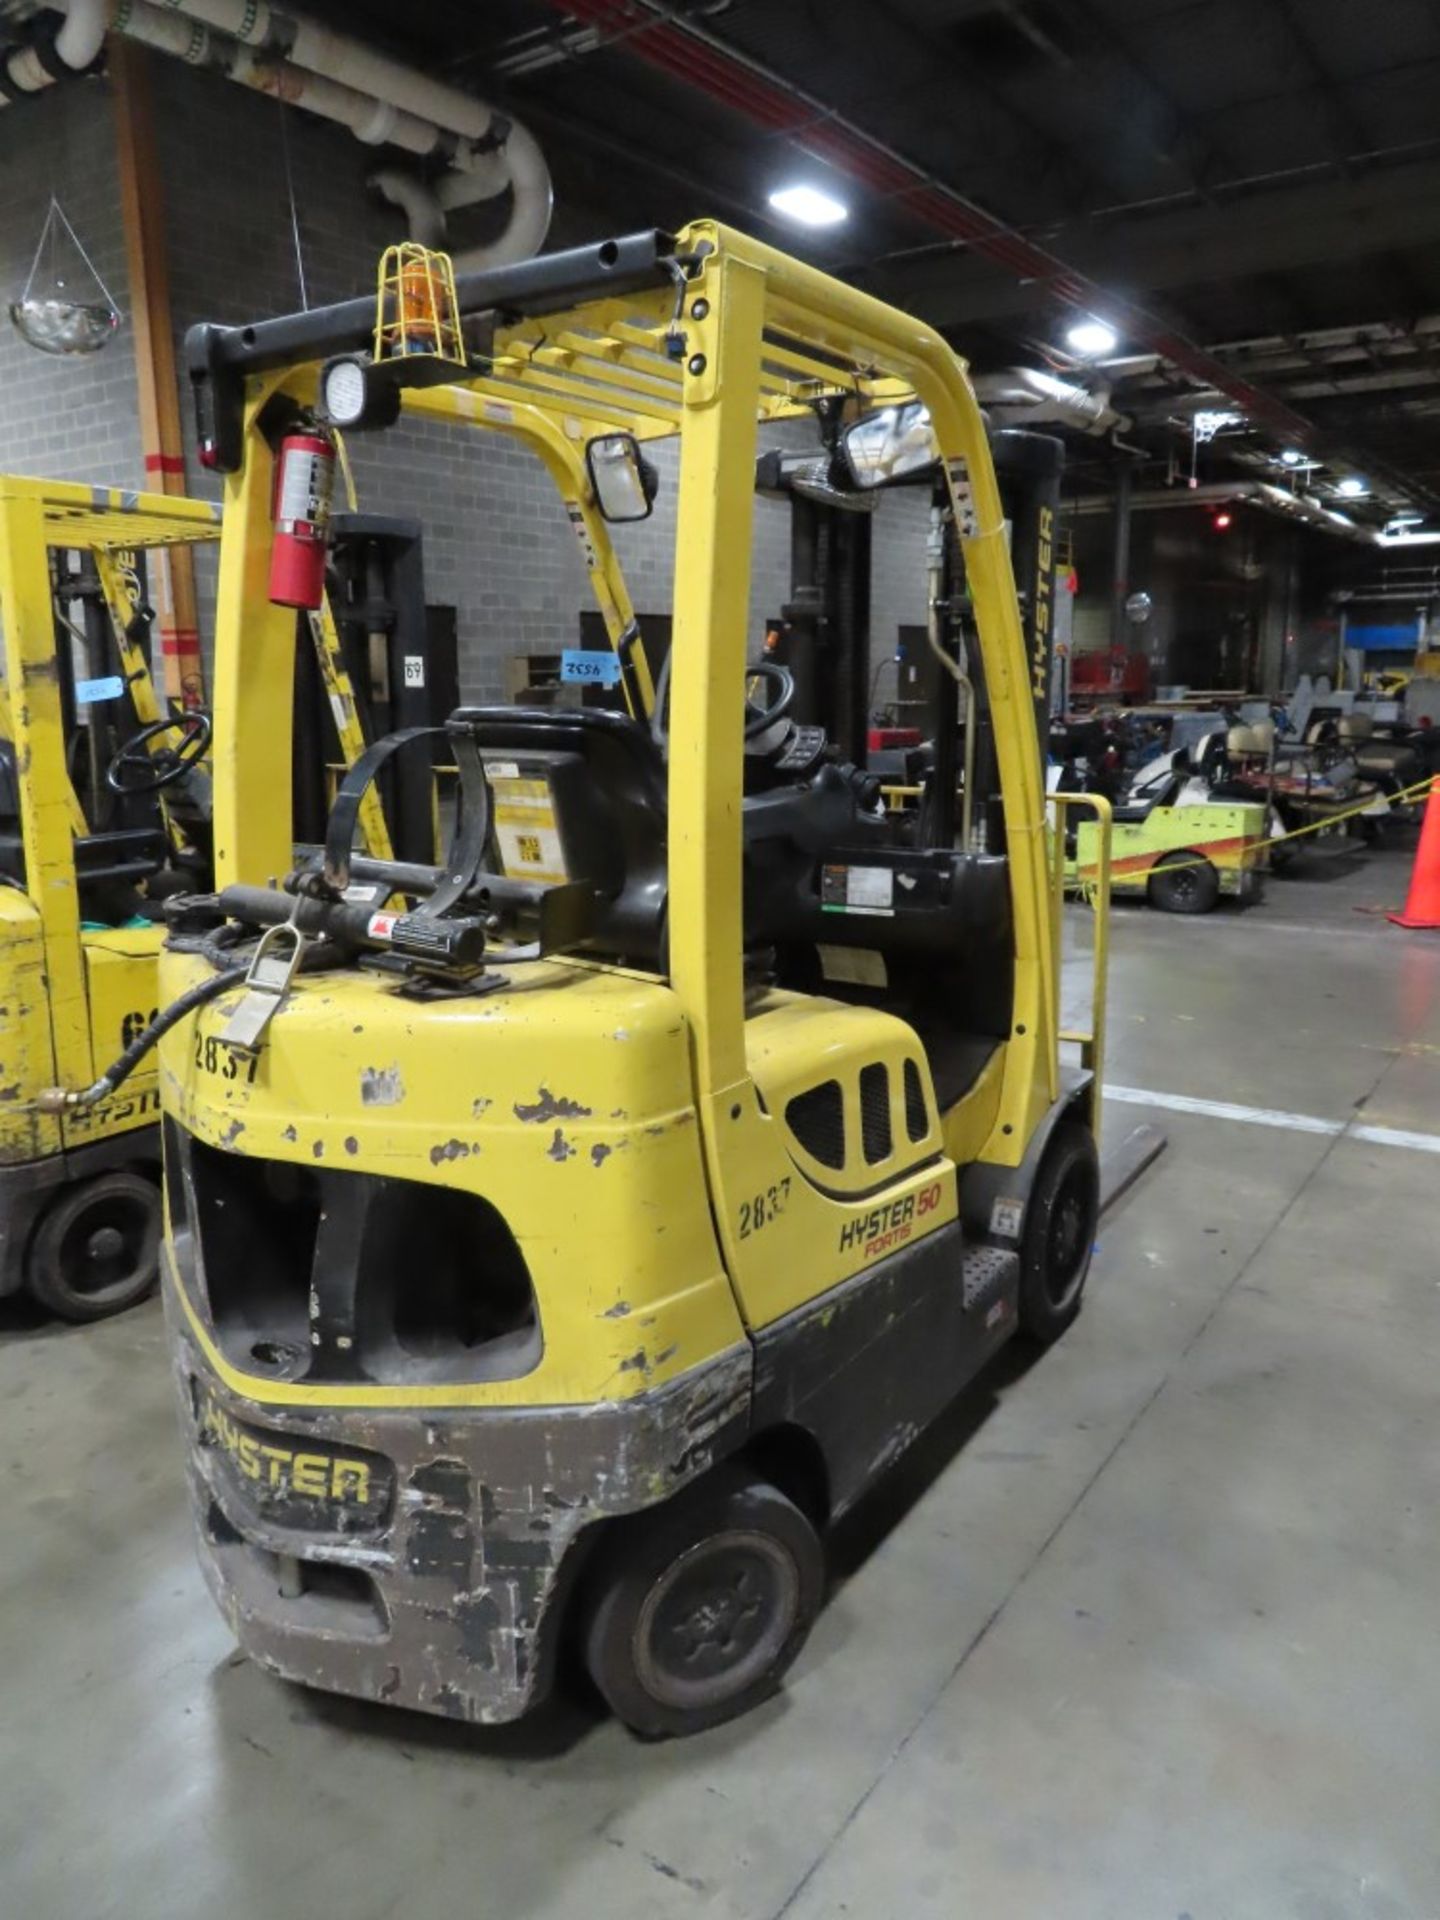 HYSTER MDL. S50FT 4,800LB. CAPACITY PROPANE FORKLIFT TRUCK - Image 4 of 5